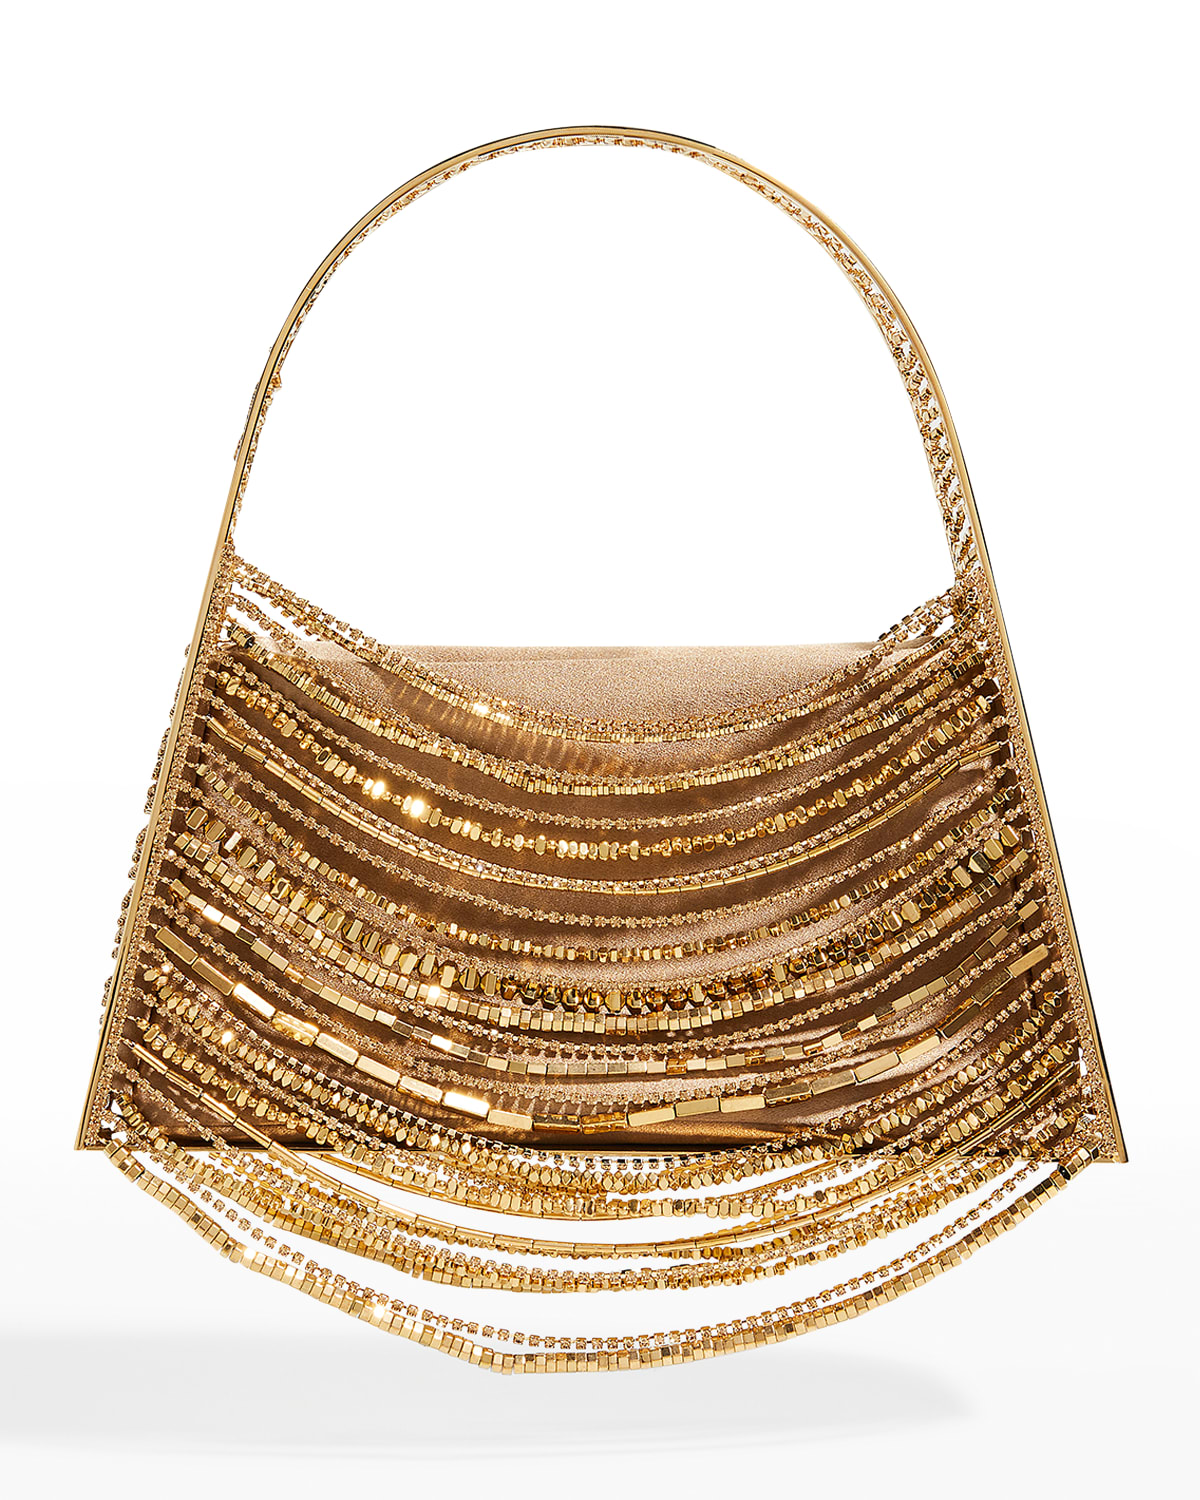 Benedetta Bruzziches Lucia in the Sky Crystal Top-Handle Bag | Neiman ...